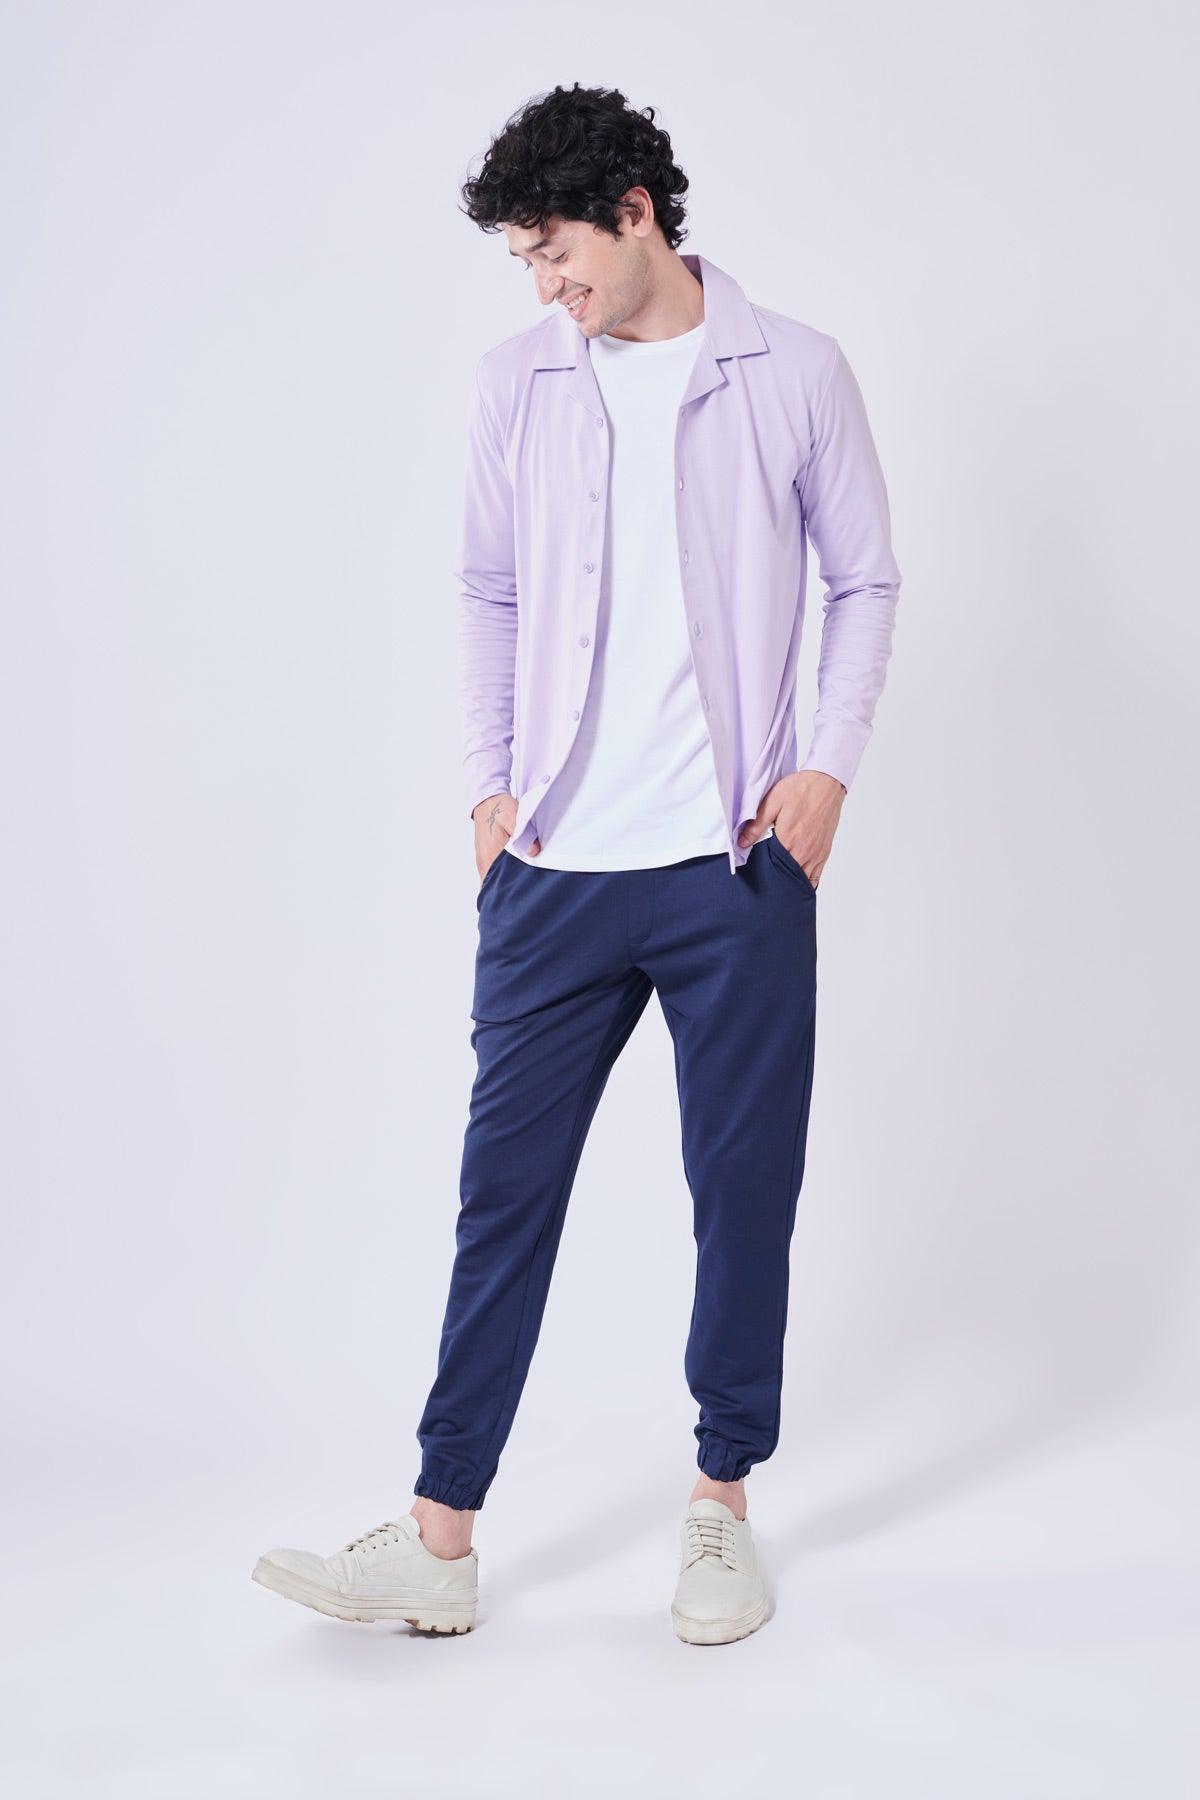 Royal Blue Formal and casual Pant online for men  Beyours  Page 2